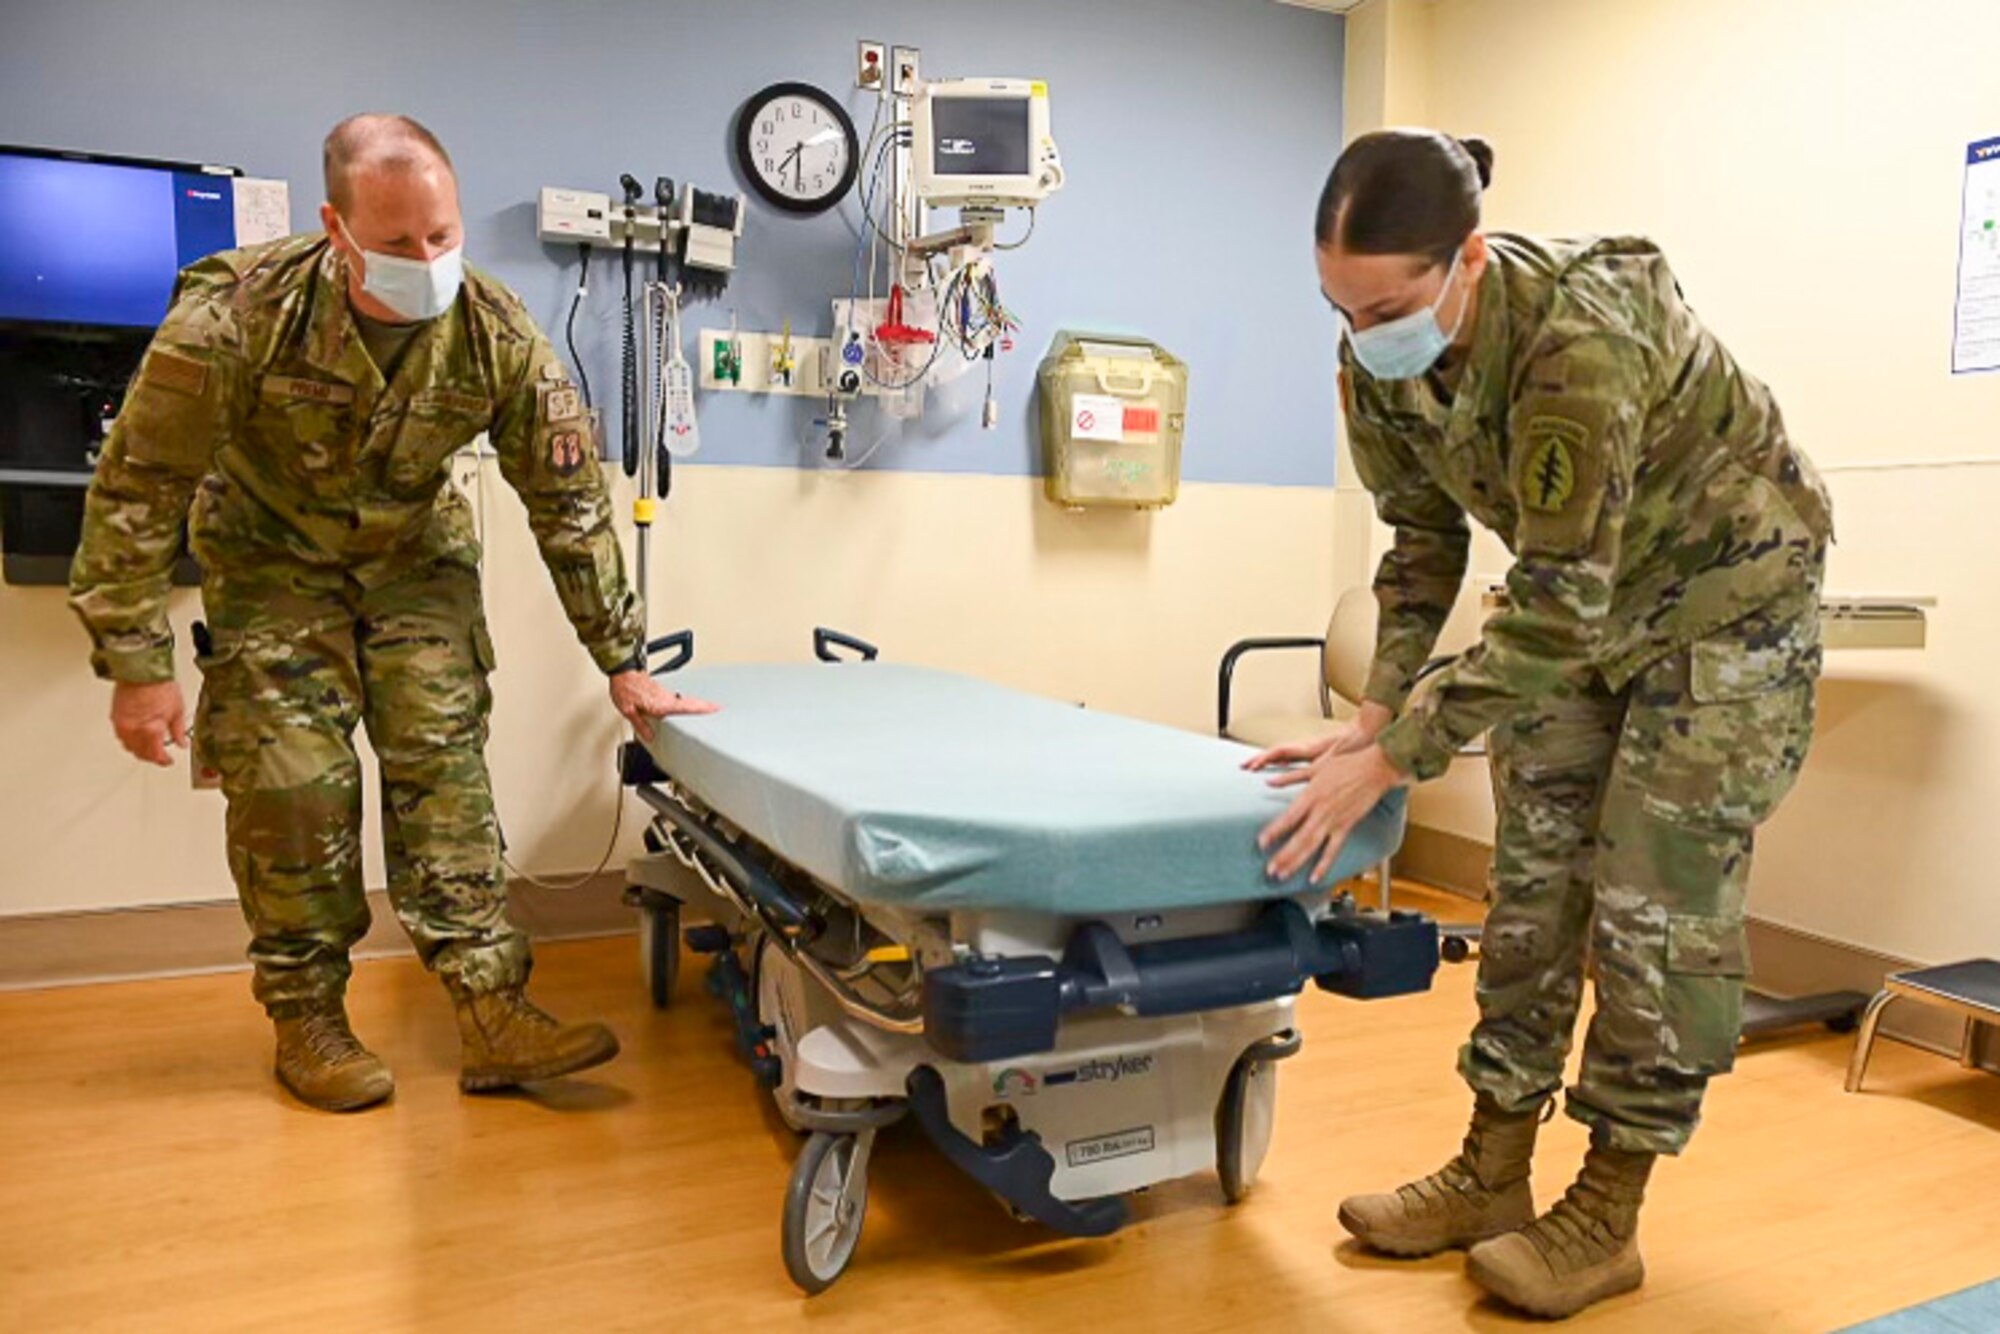 U.S. Air Force Master Sgt. Derek Premo, a flight chief for the 167th Security Forces Squadron, and U.S. Army Spc. Tamara Bumgardener, a motor vehicle operator for the 1528th Forward Support Company, Special Operations (Airborne), prepare a patient examination bed in a room at Jefferson Medical Center in Ranson, West Virginia. West Virginia Guardsmen have been assisting in hospitals throughout the state since January as requested by West Virginia Governor Jim Justice.